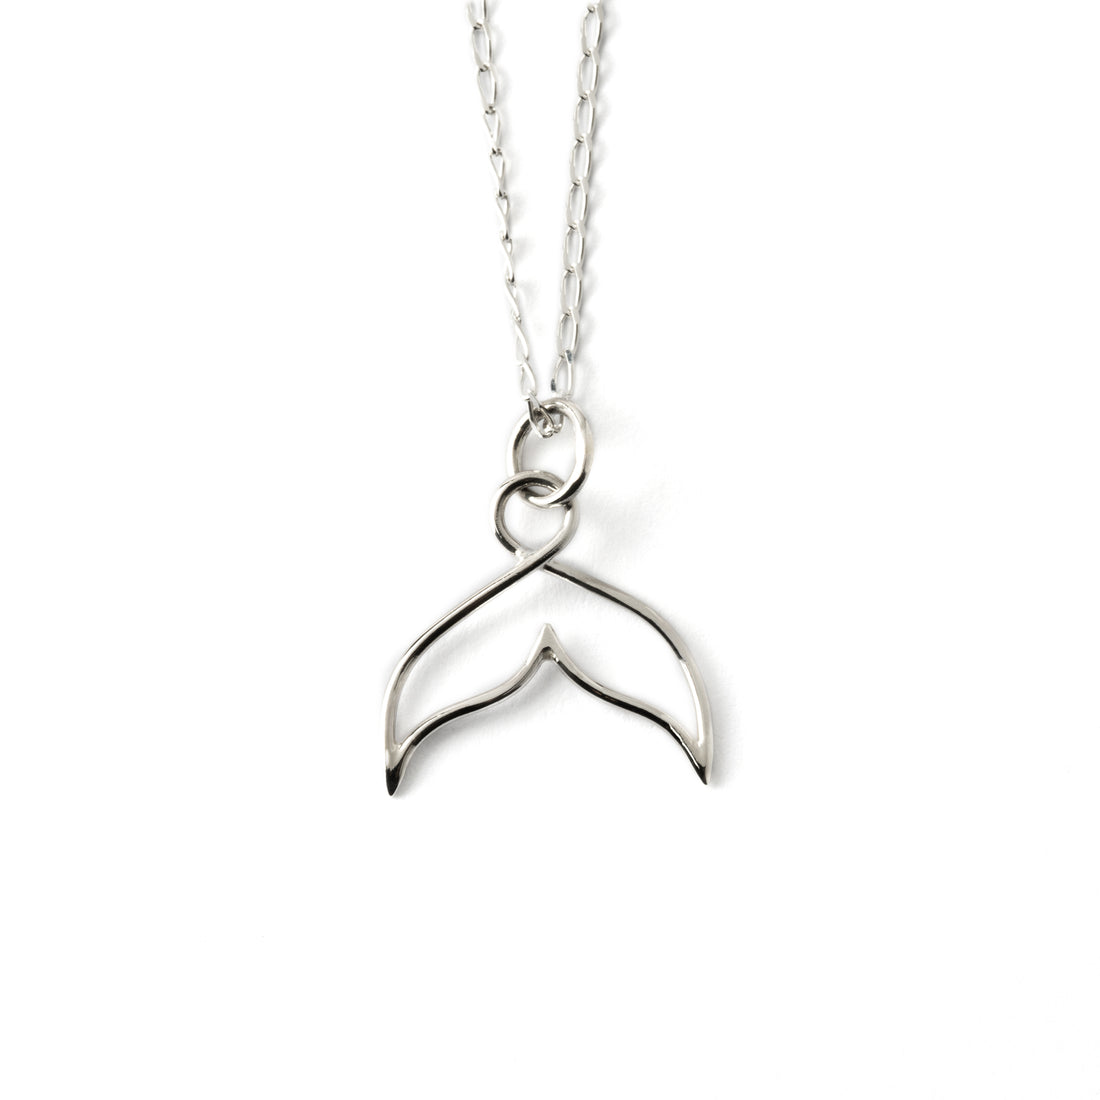 Silver-Wire-Whale-Tail-Charm